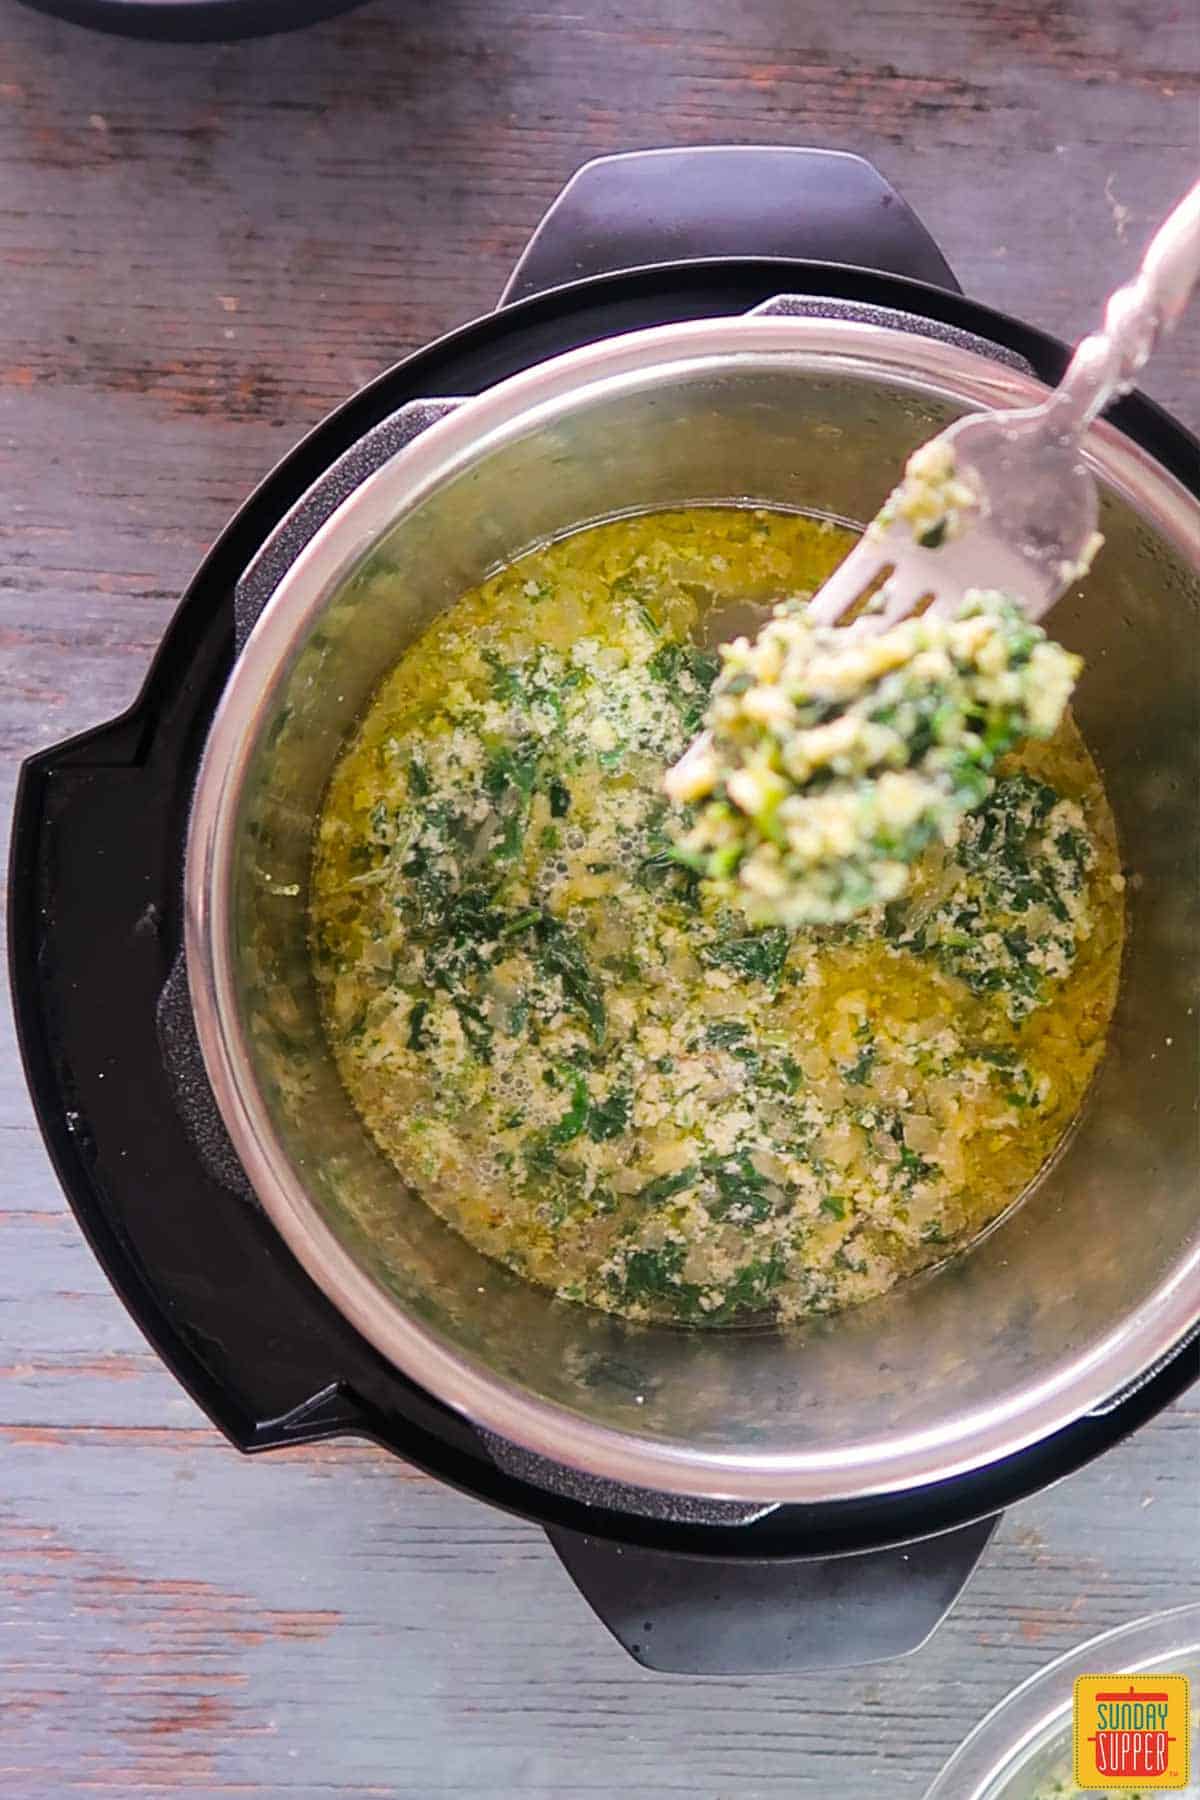 Dropping egg mixture into Instant pot Italian wedding soup